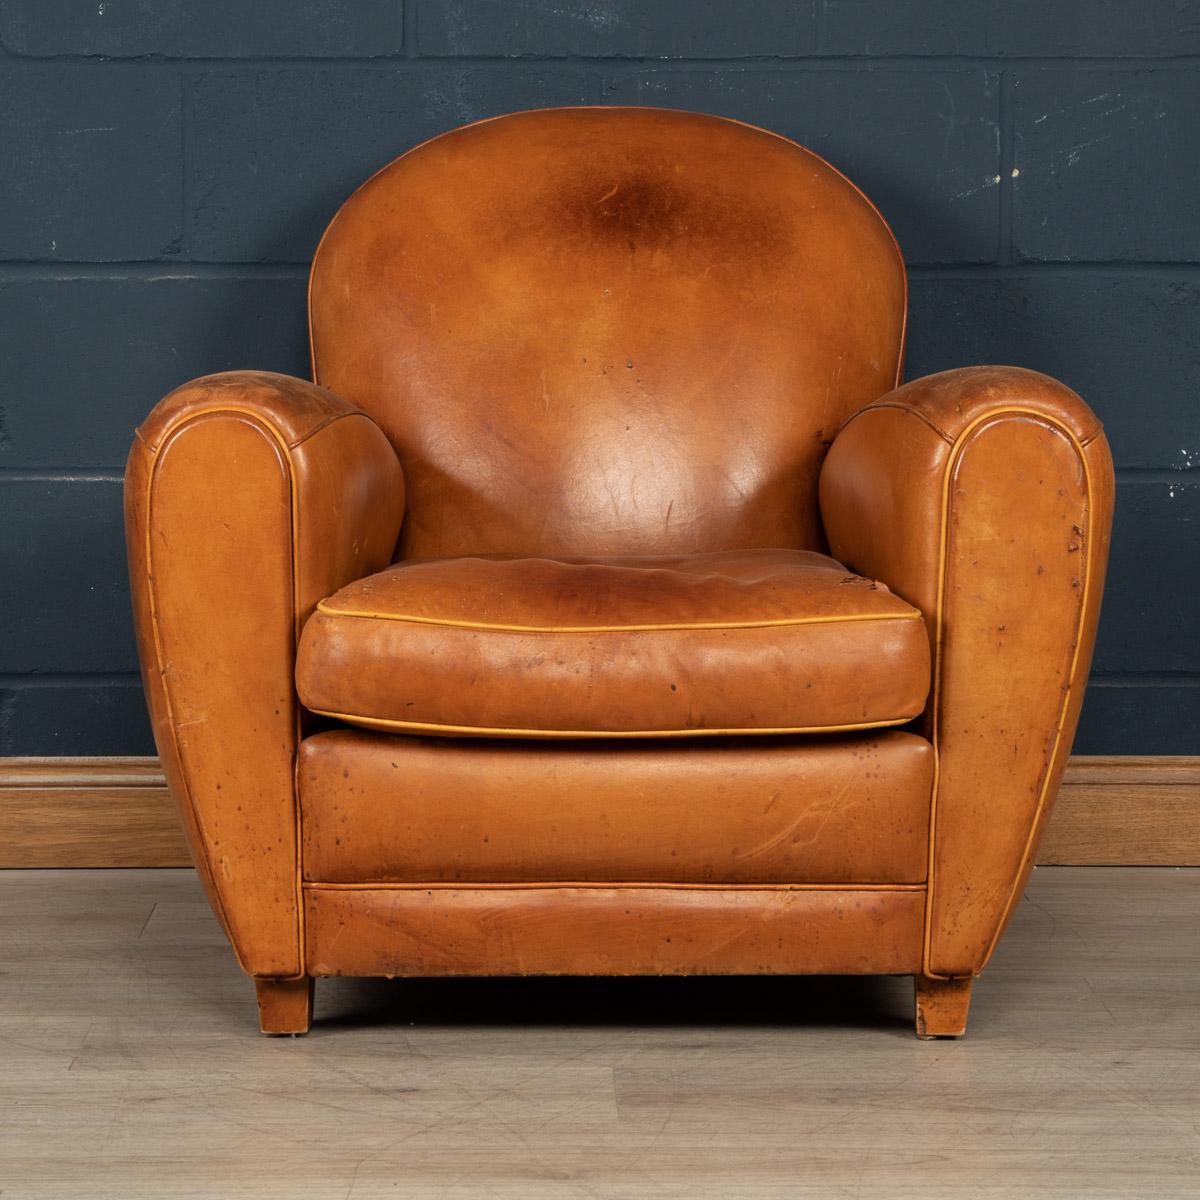 A fine quality leather armchair made in France in the latter end of the last century. Hand made, the timber frame is clad with a wonderfully rich tan leather hide, supple to the touch and extremely comfortable. Even though the armchair shows some